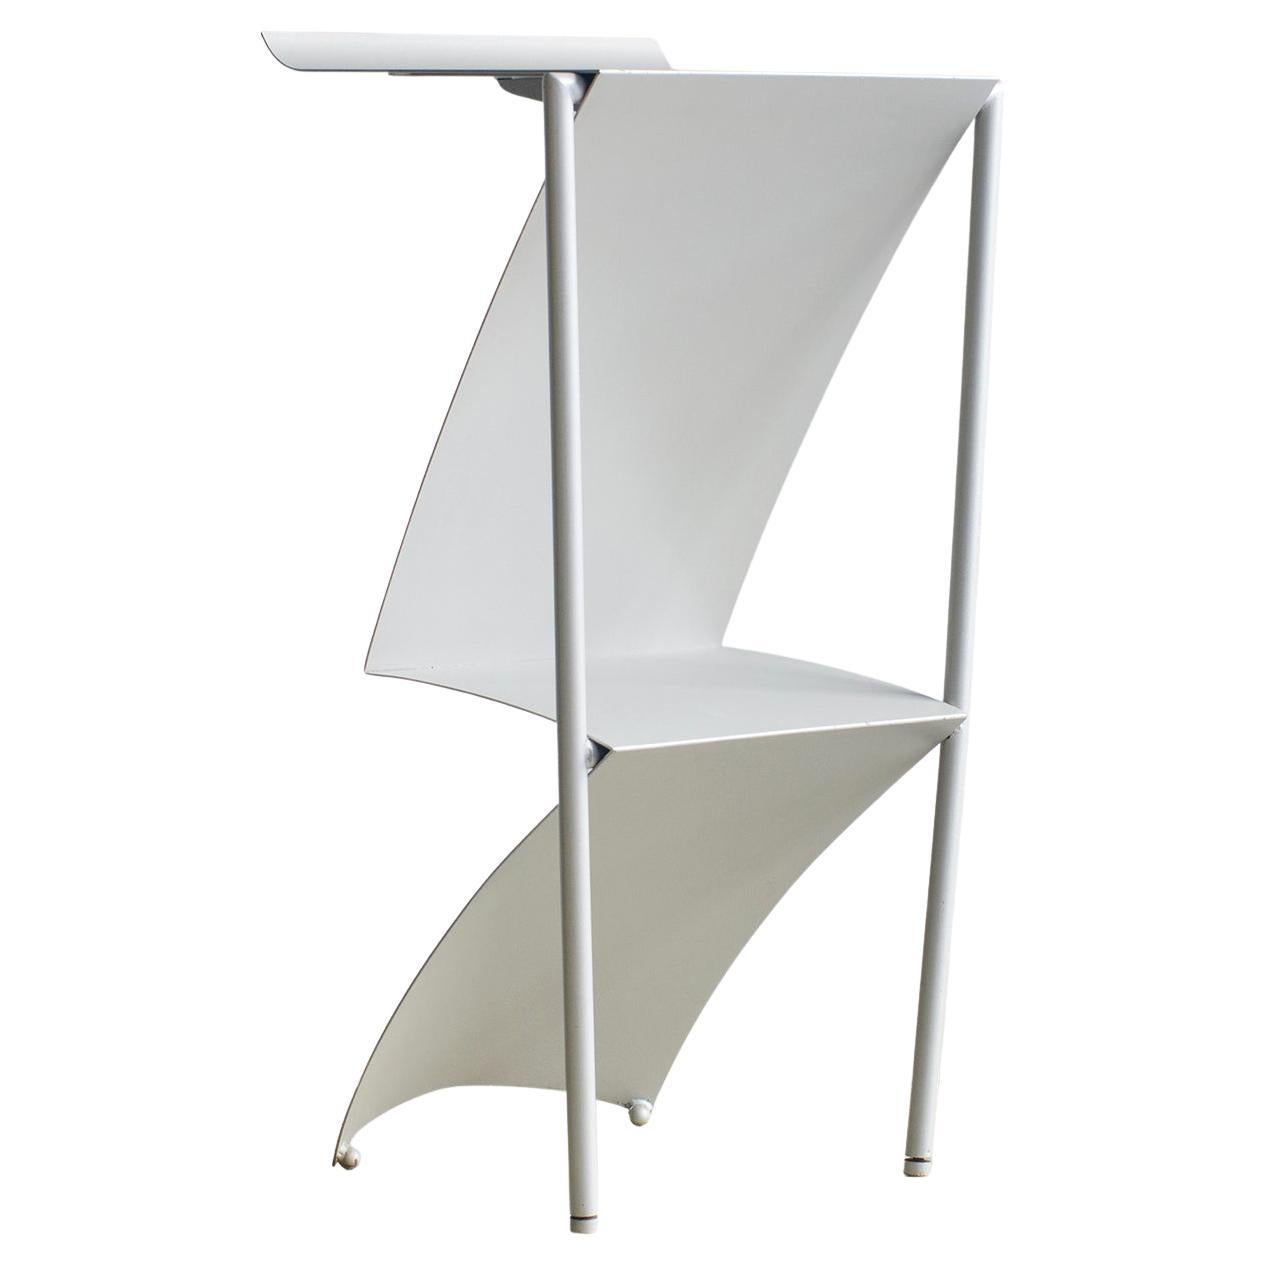 Marie Christine Doner S’il Vous Plait High Stool Side Table Postmodern Starck For Sale